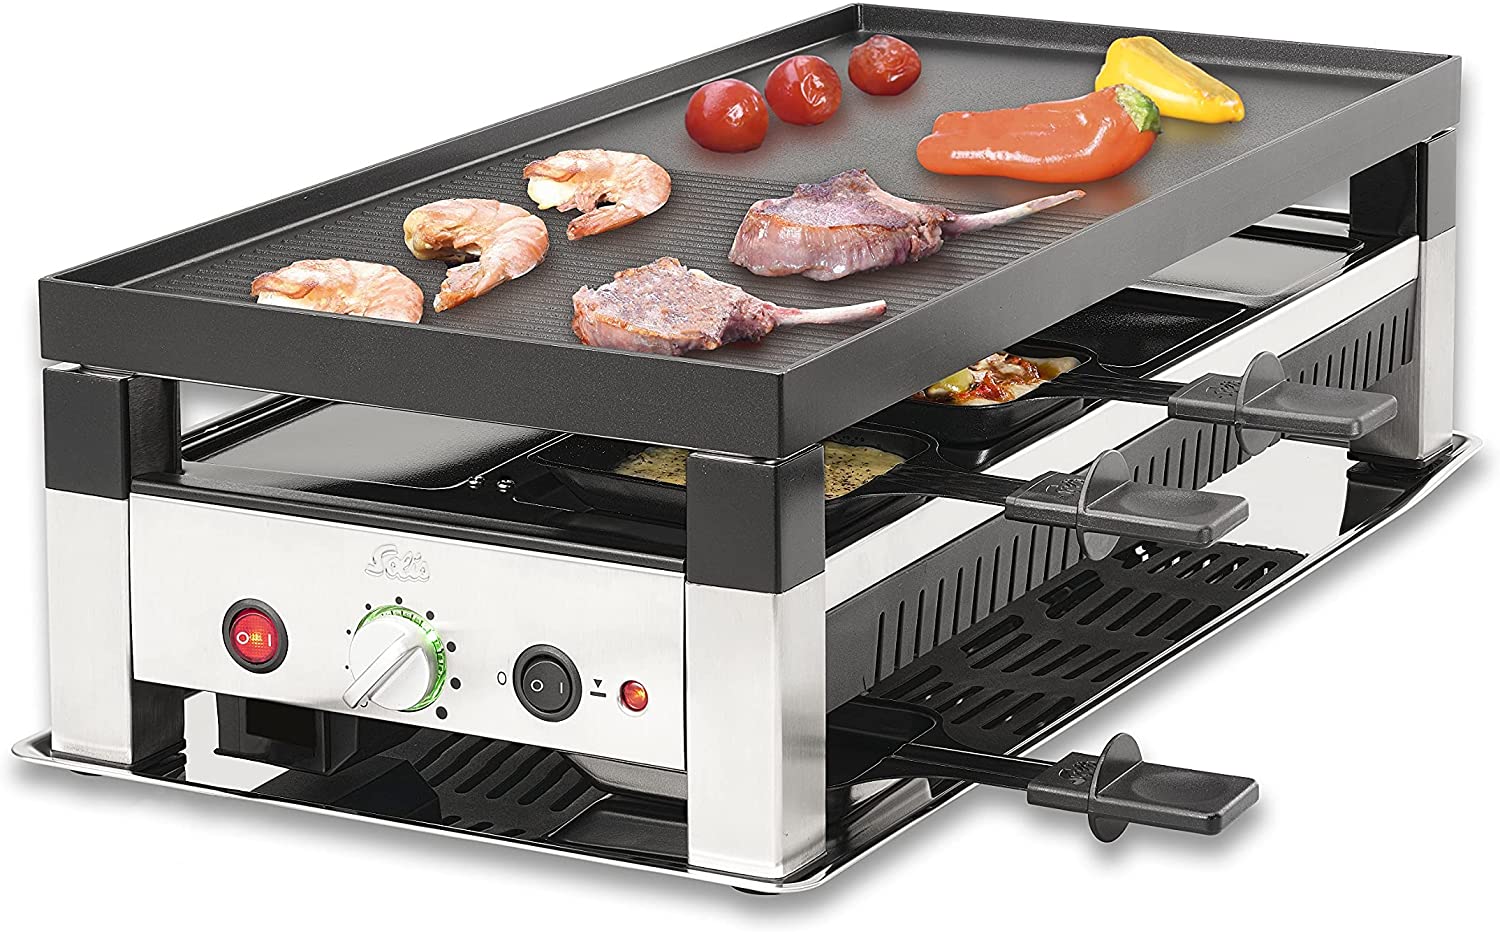 Solis Table Grill 5 in 1 Table Grill 791 - Raclette + Grill + Wok + Pizza Grill + Crepes - Raclette for 8 People - Stainless Steel